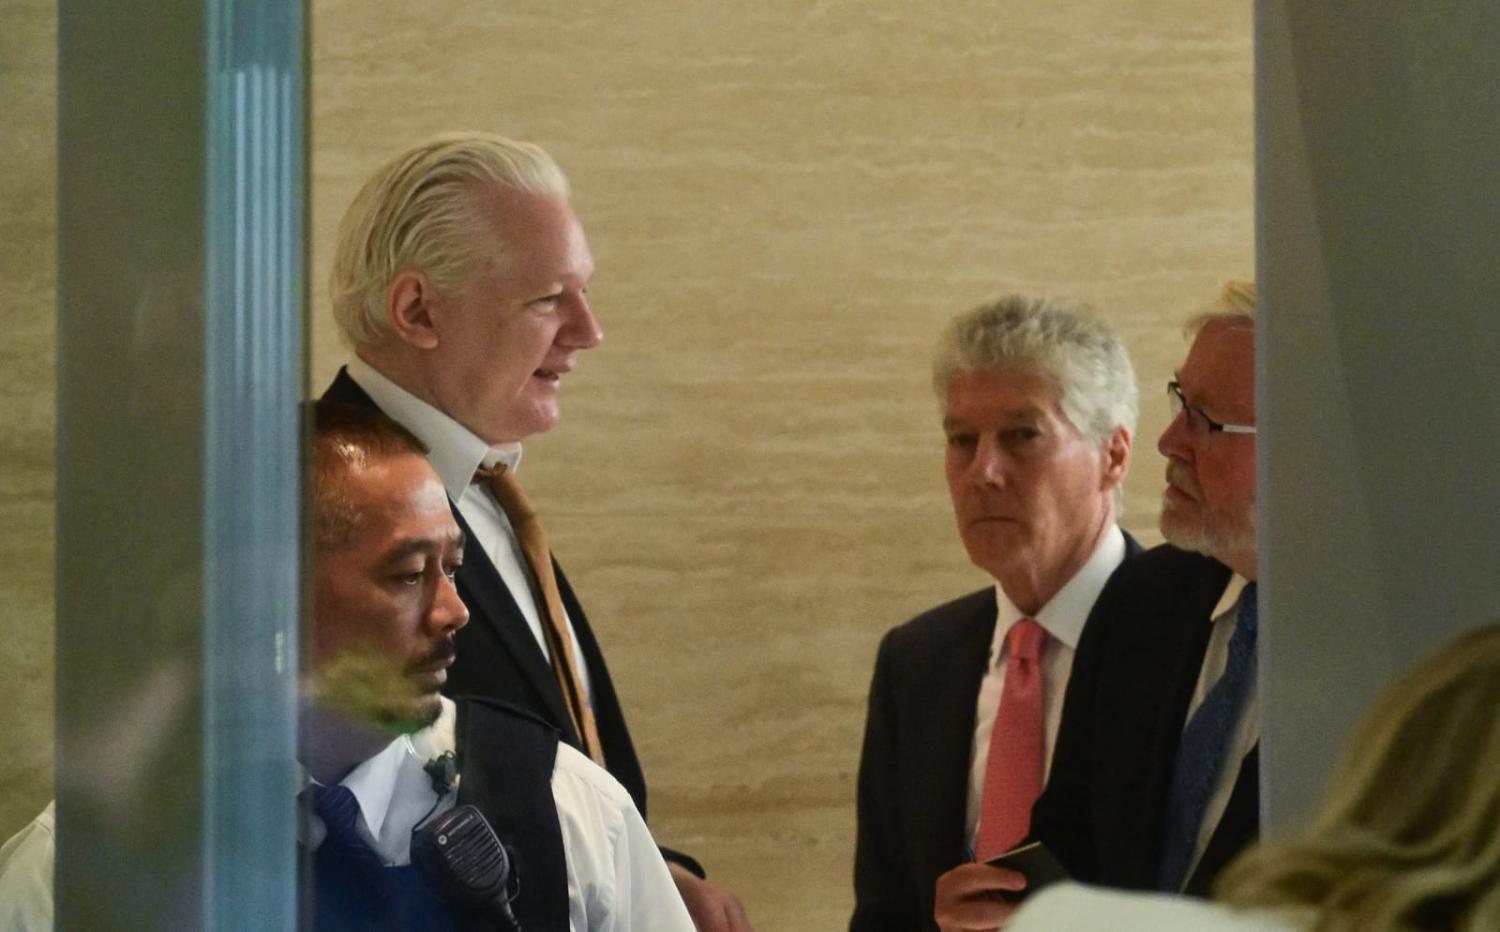 WikiLeaks founder Julian Assange, left, speaking with Australian ambassador to the US Kevin Rudd and Australian High Commissioner to the United Kingdom Stephen Smith outside a court in Saipan, Northern Mariana Islands (Yuichi Yamazaki/AFP via Getty)